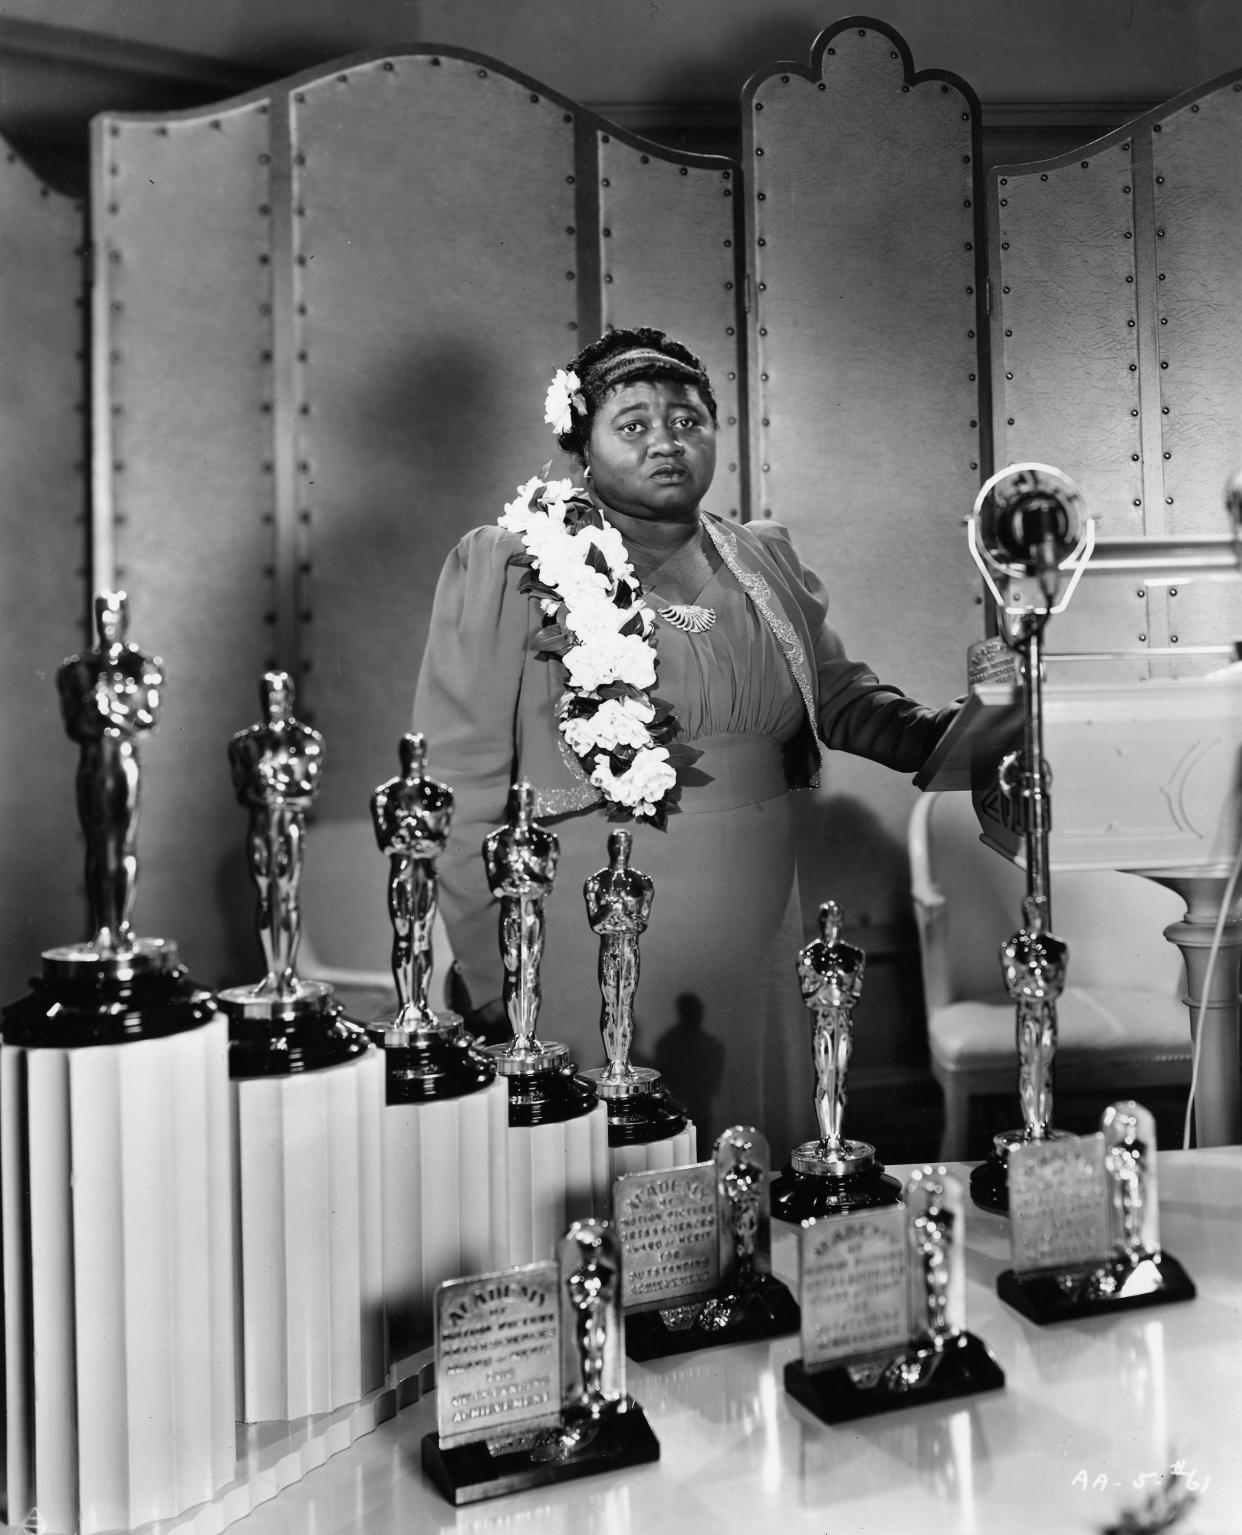 Portrait of Hattie McDaniel at the 12th Academy Awards ceremony on Feb. 29, 1940. McDaniel made history that night when she became the first Black performer to win an Oscar. Examples of what her Oscar plaque would have looked like sit in the foreground.